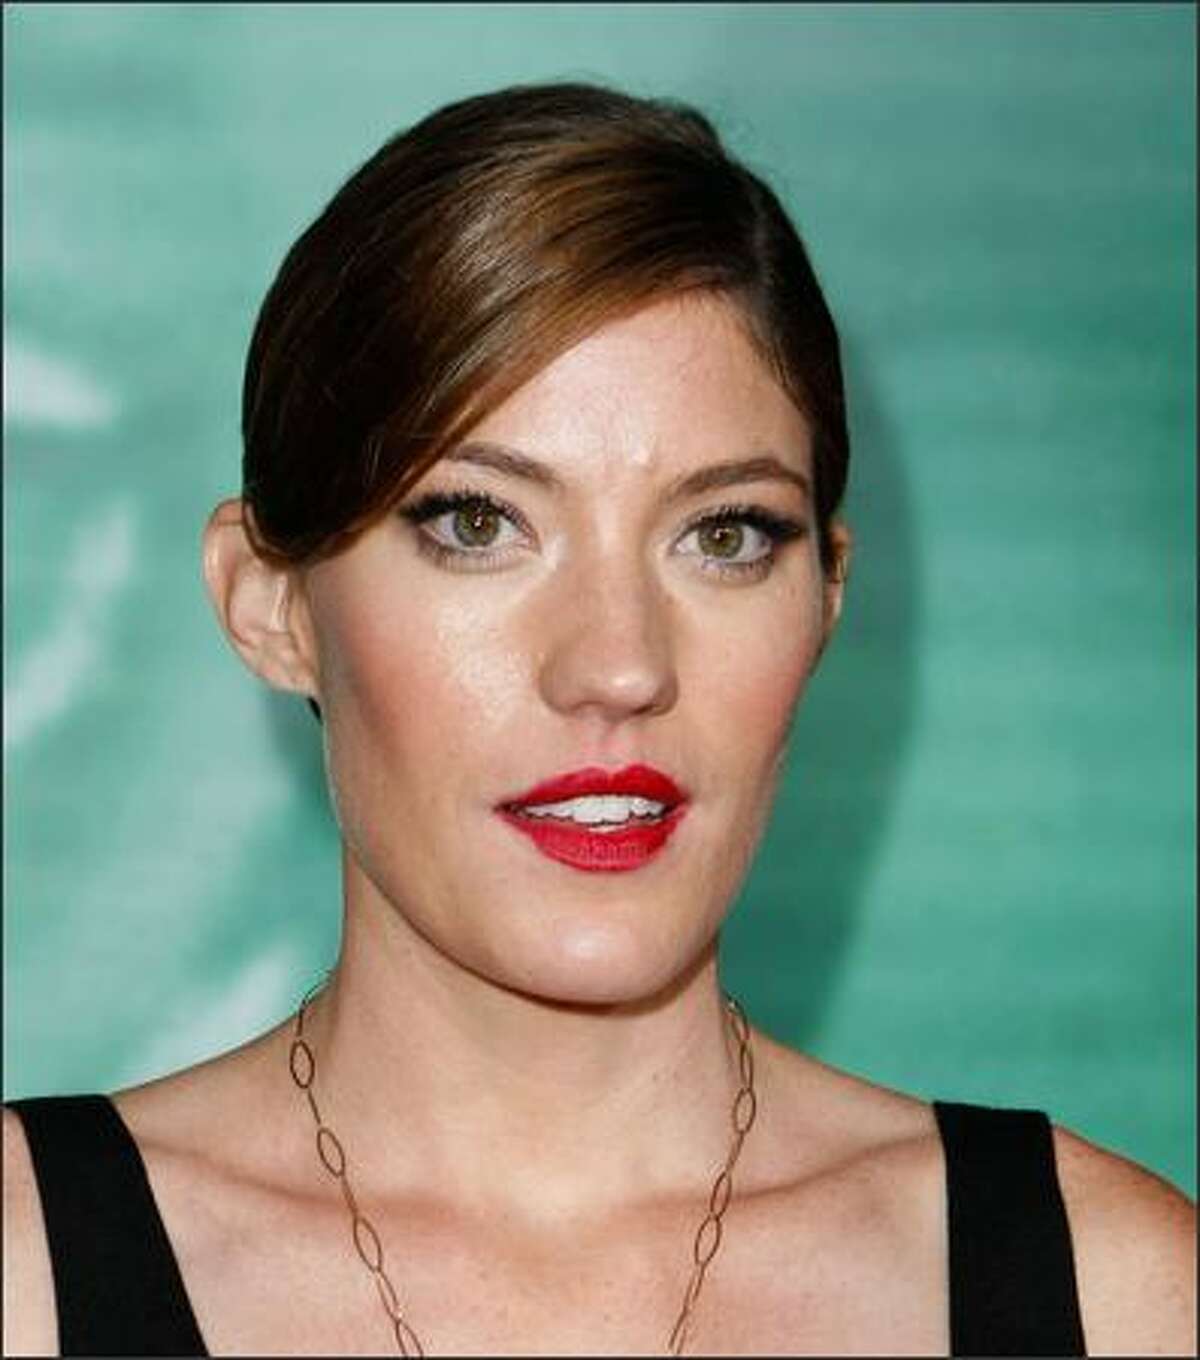 Actress Jennifer Carpenter arrives at the premiere of Screen Gems' "Quarantine" at Knott's Scary Farm on Thursday in Buena Park, Calif.